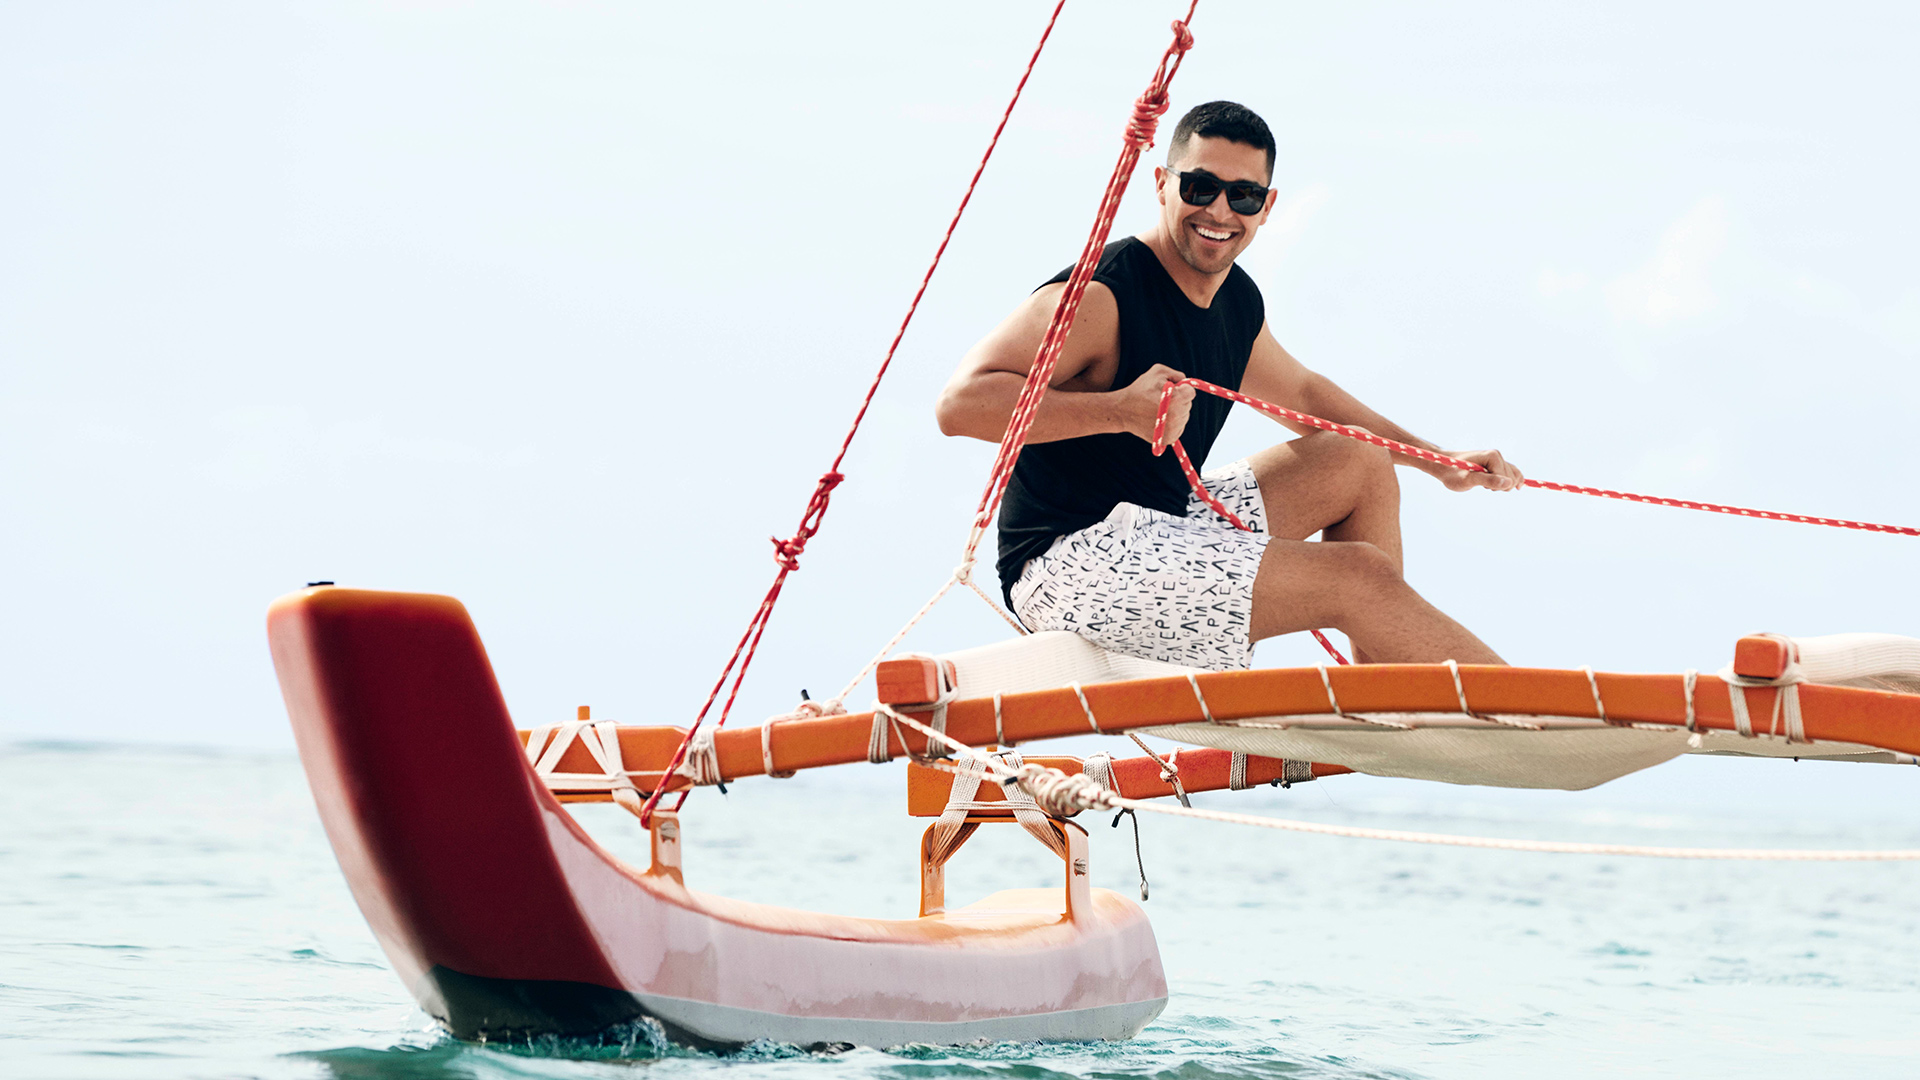 We'd sail away with Wilmer Valderrama any day